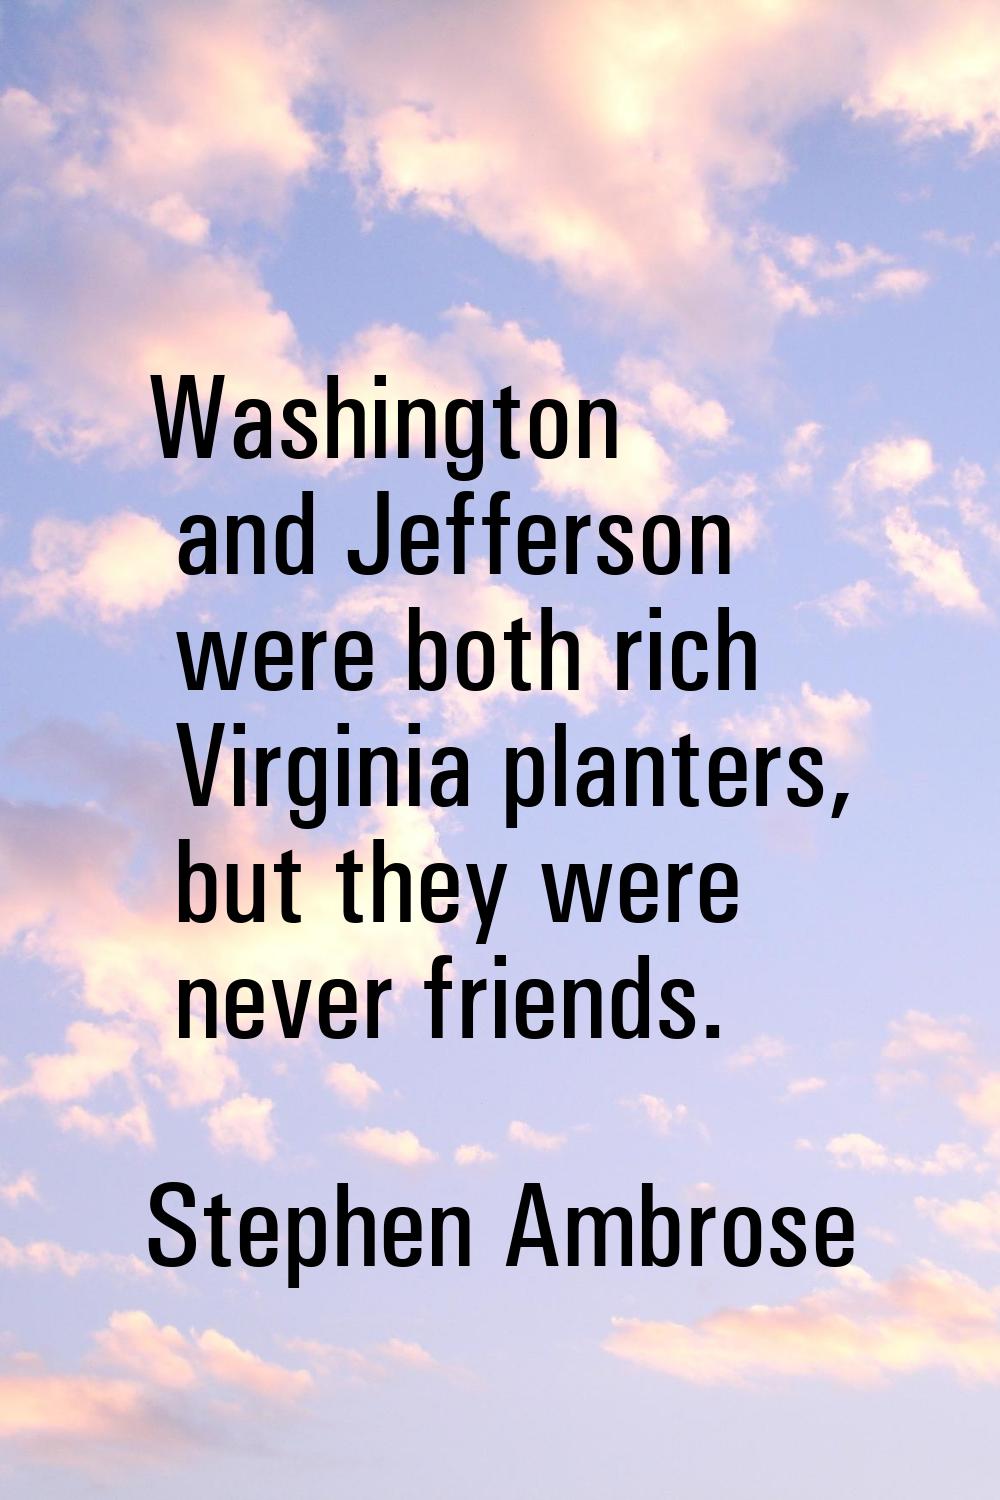 Washington and Jefferson were both rich Virginia planters, but they were never friends.